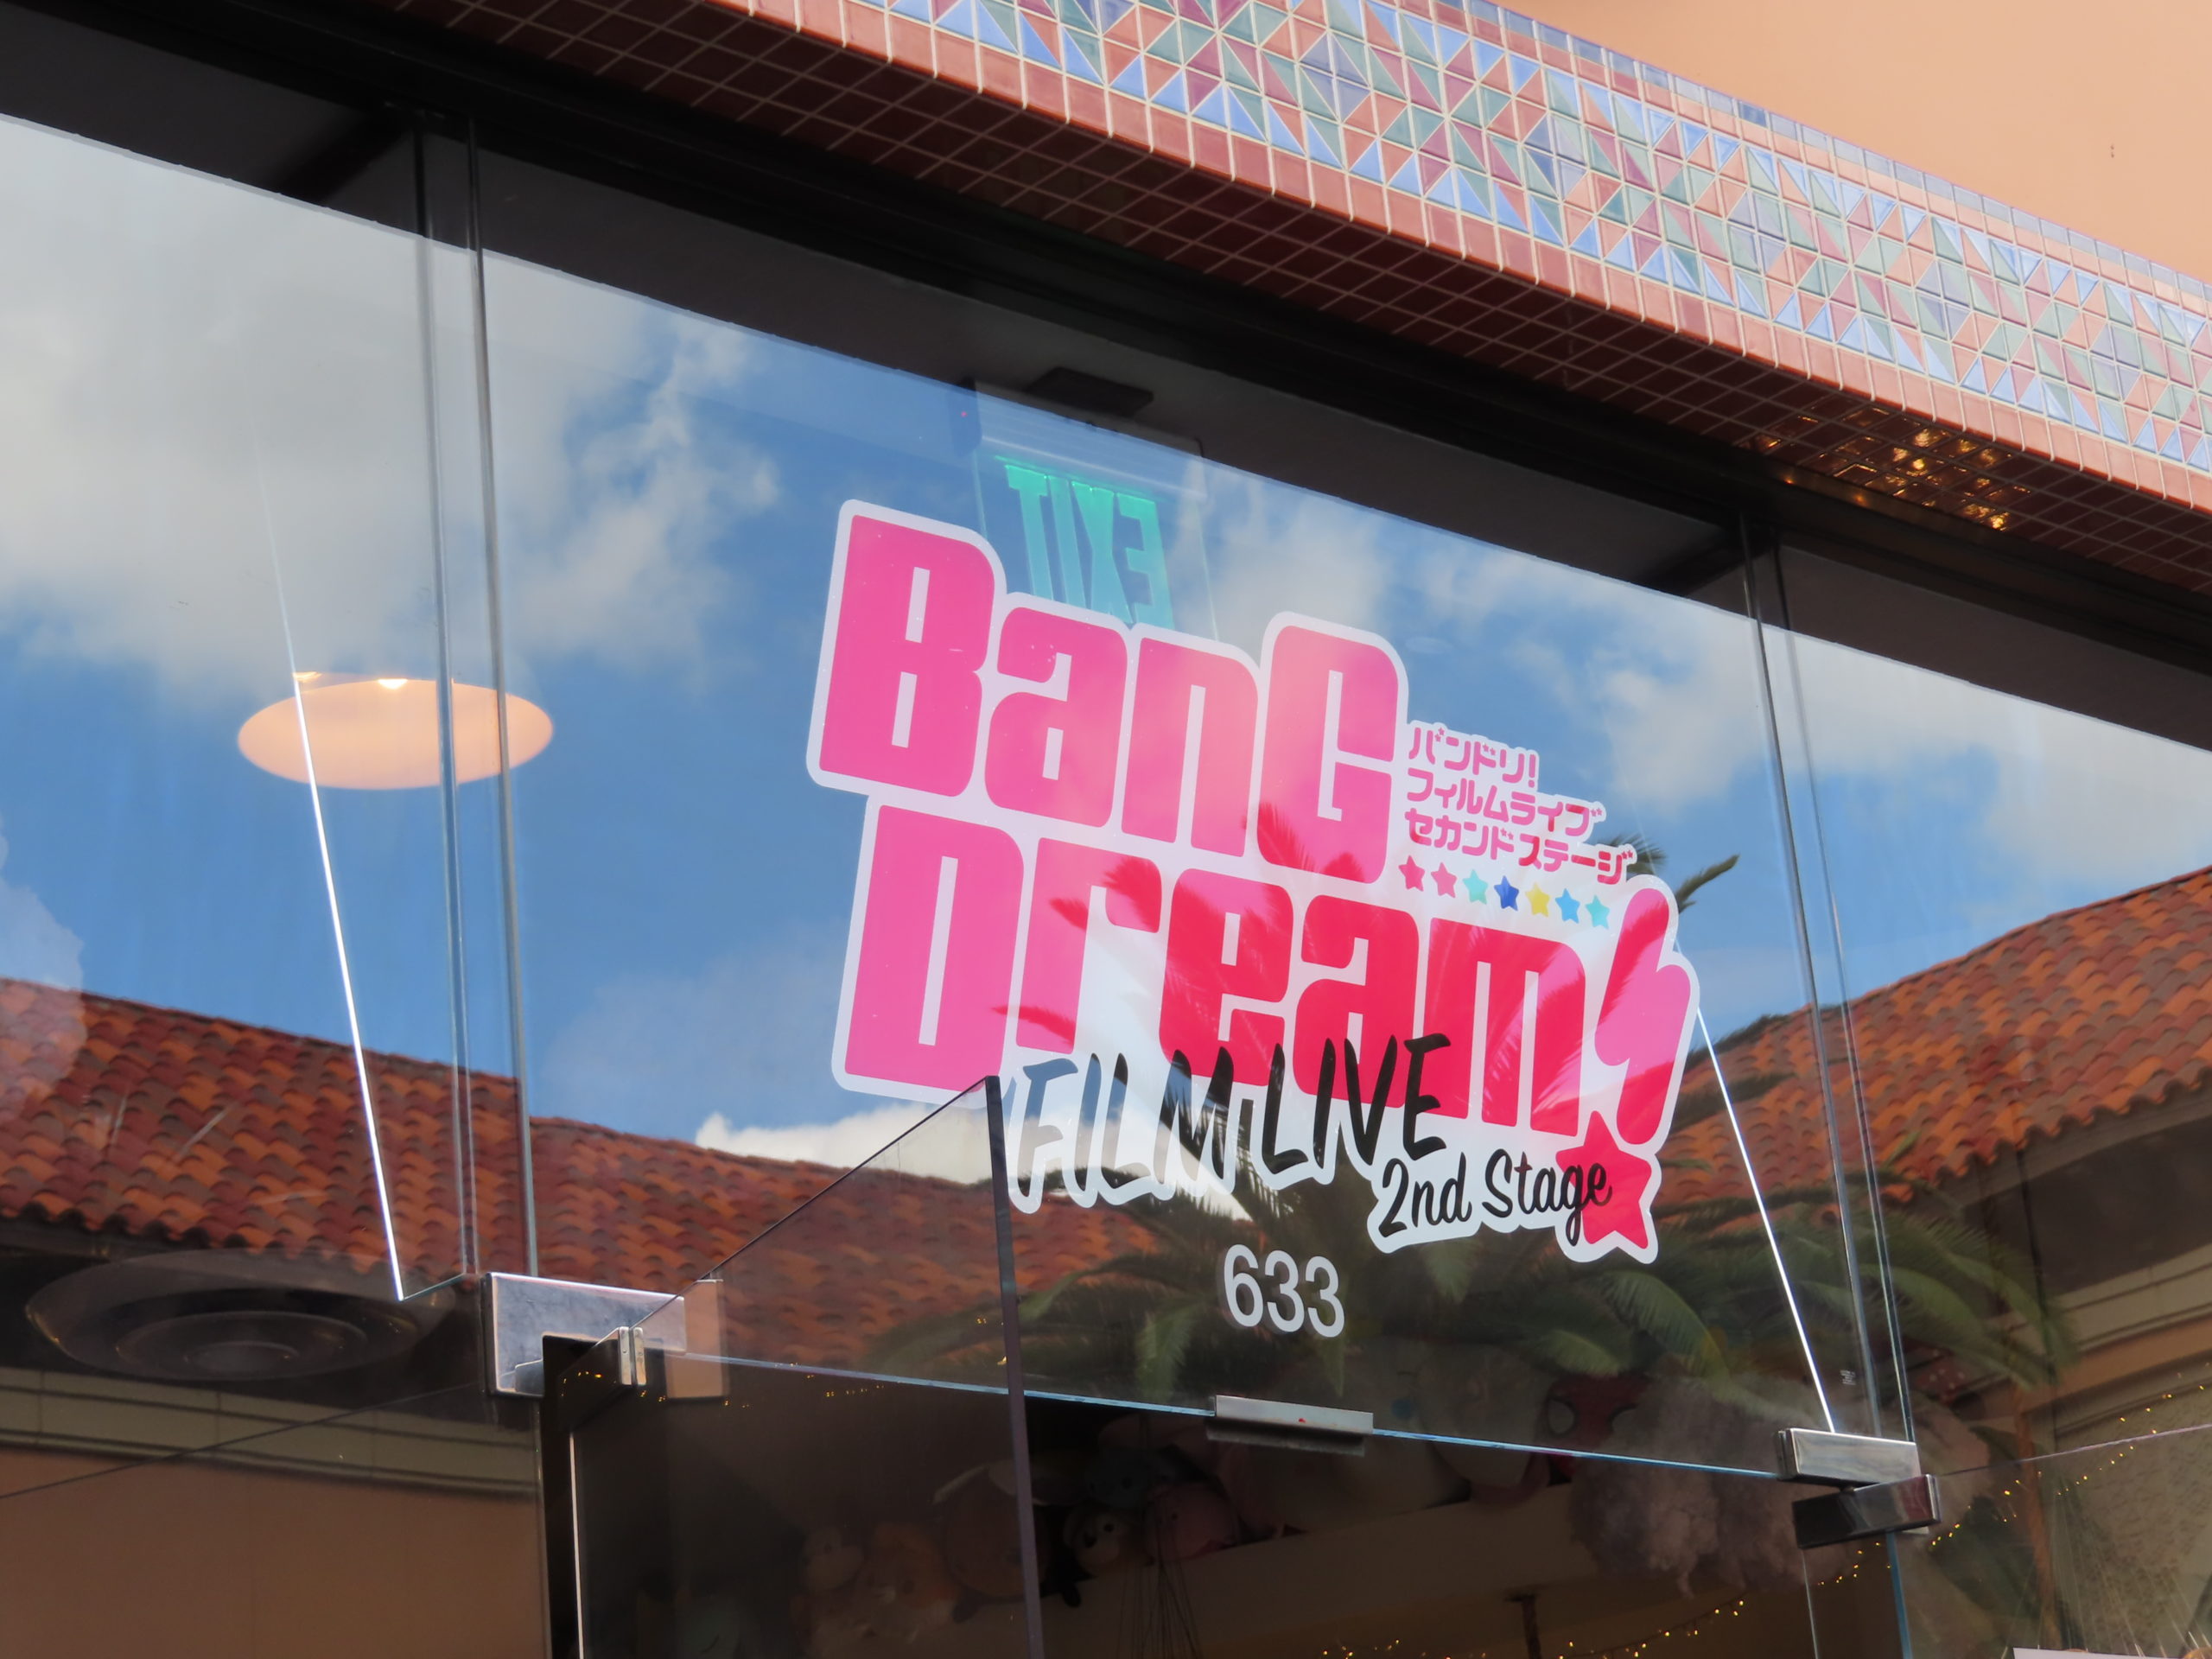 BanG Dream! FILM LIVE 2nd Stage BanG Dream! FILM LIVE 2nd Stage